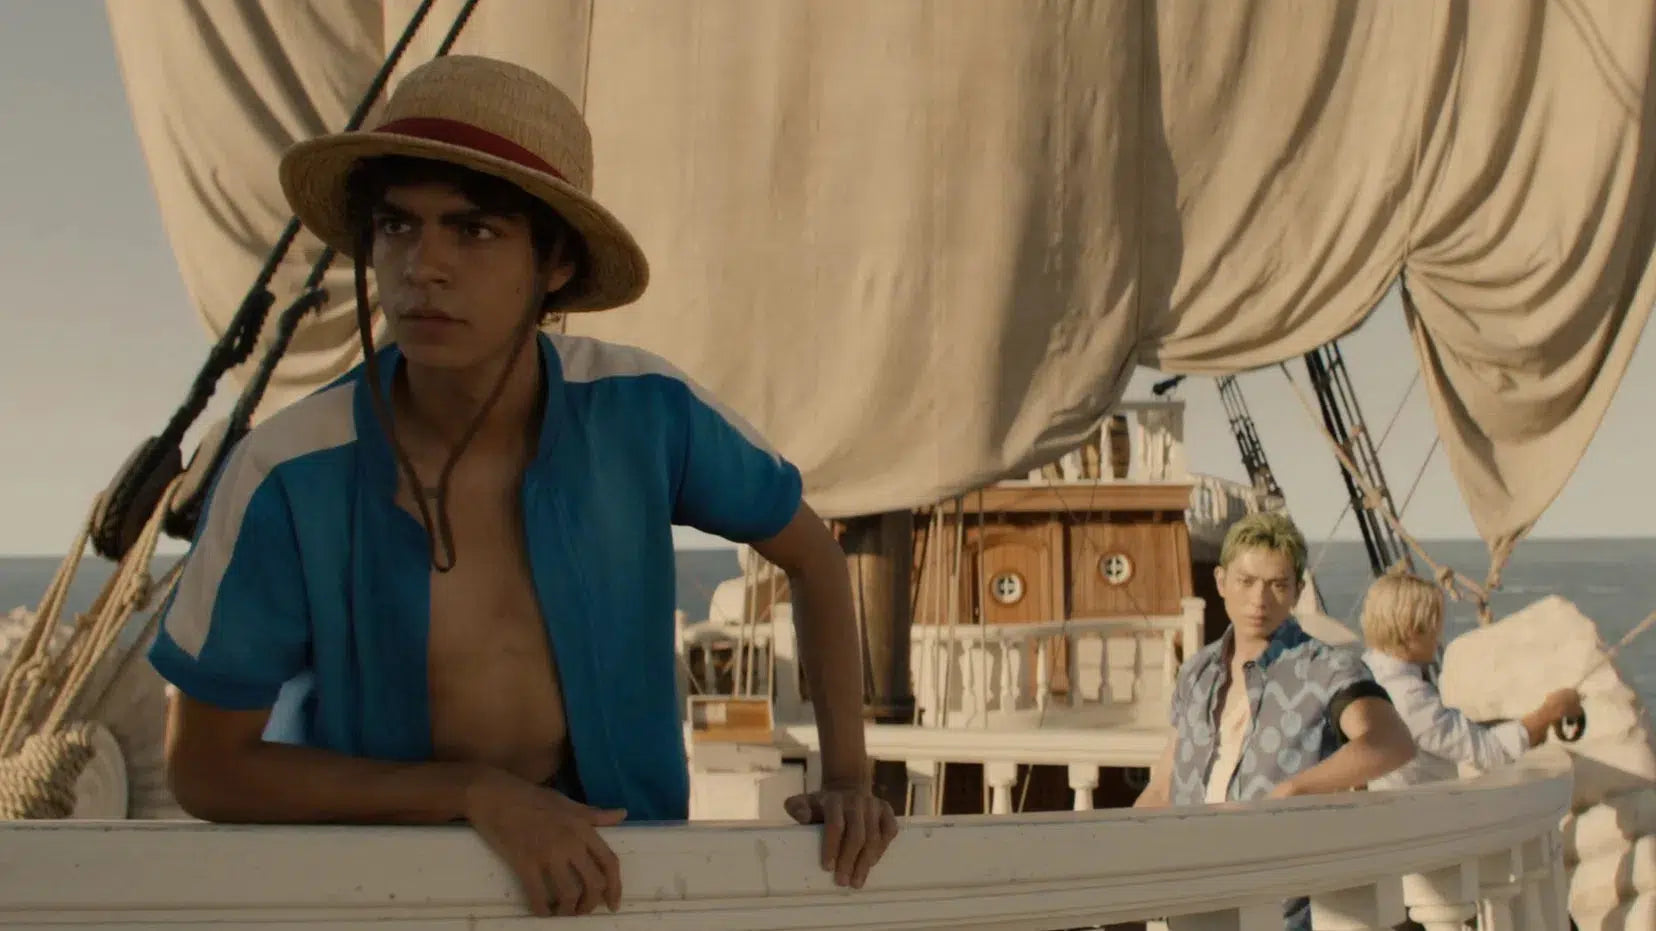 One Piece Live Action Episode 7 The Girl With The Sawfish Tattoo Luffy And Crew On The Going Merry